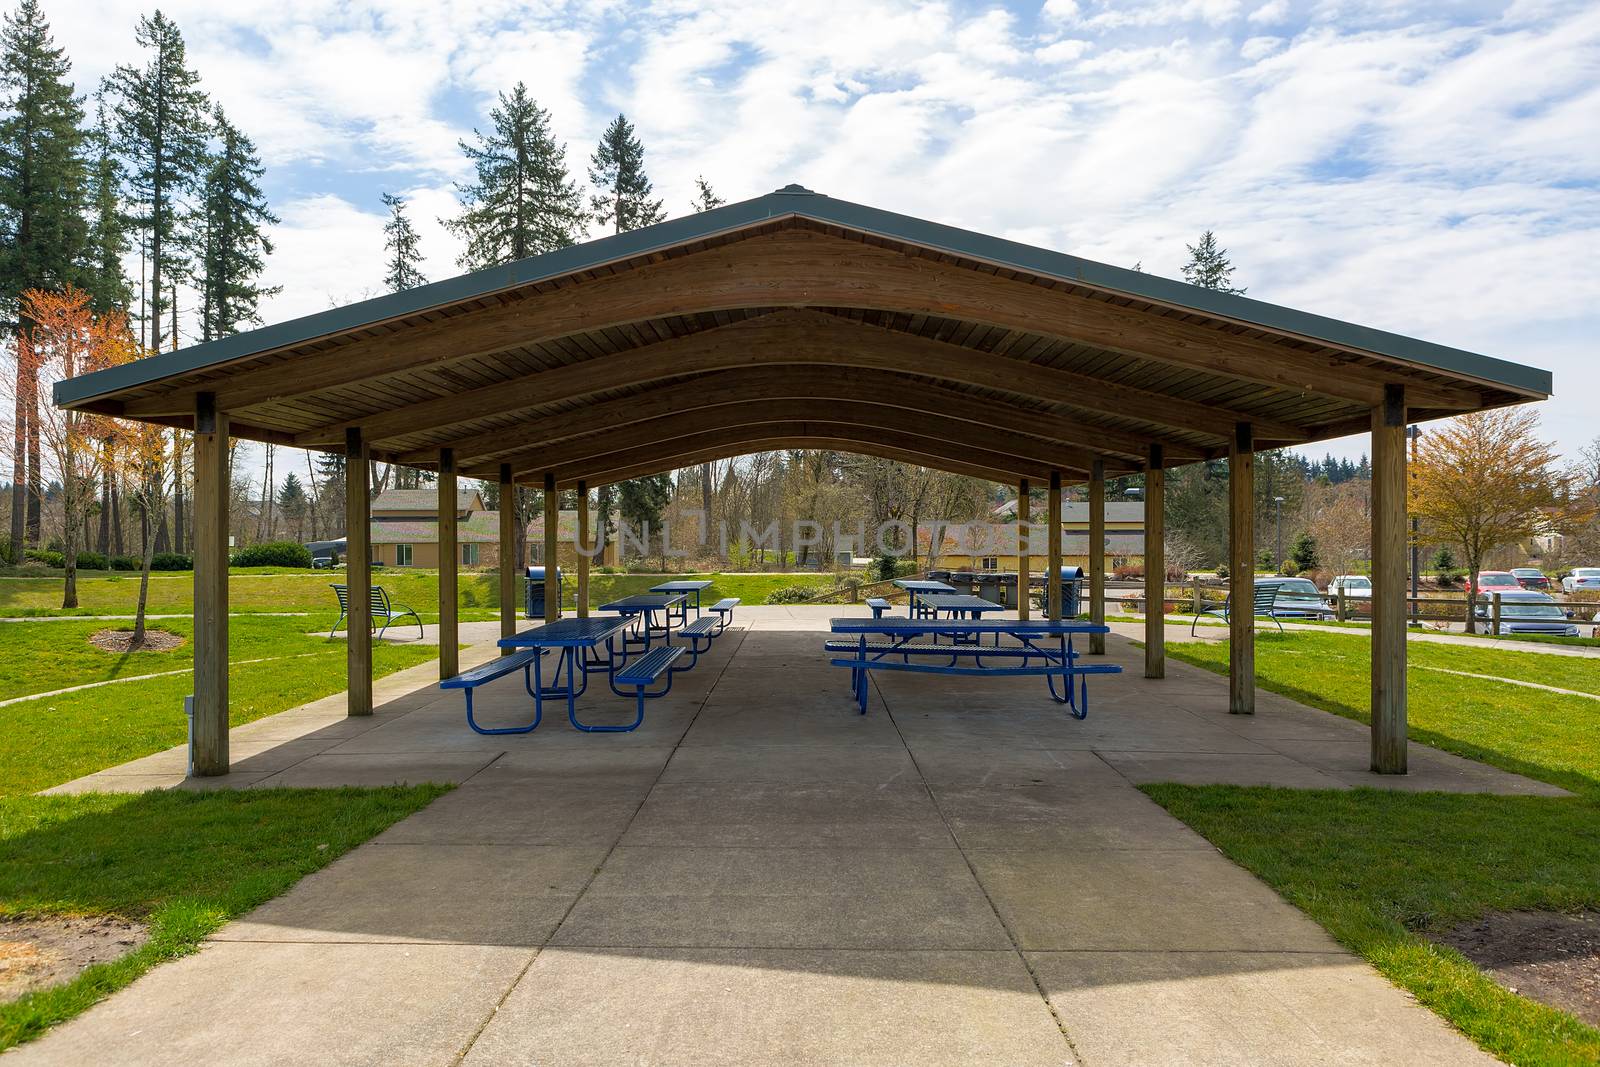 Picnic tables under wooden roof shelter structure in suburban neighborhood city park